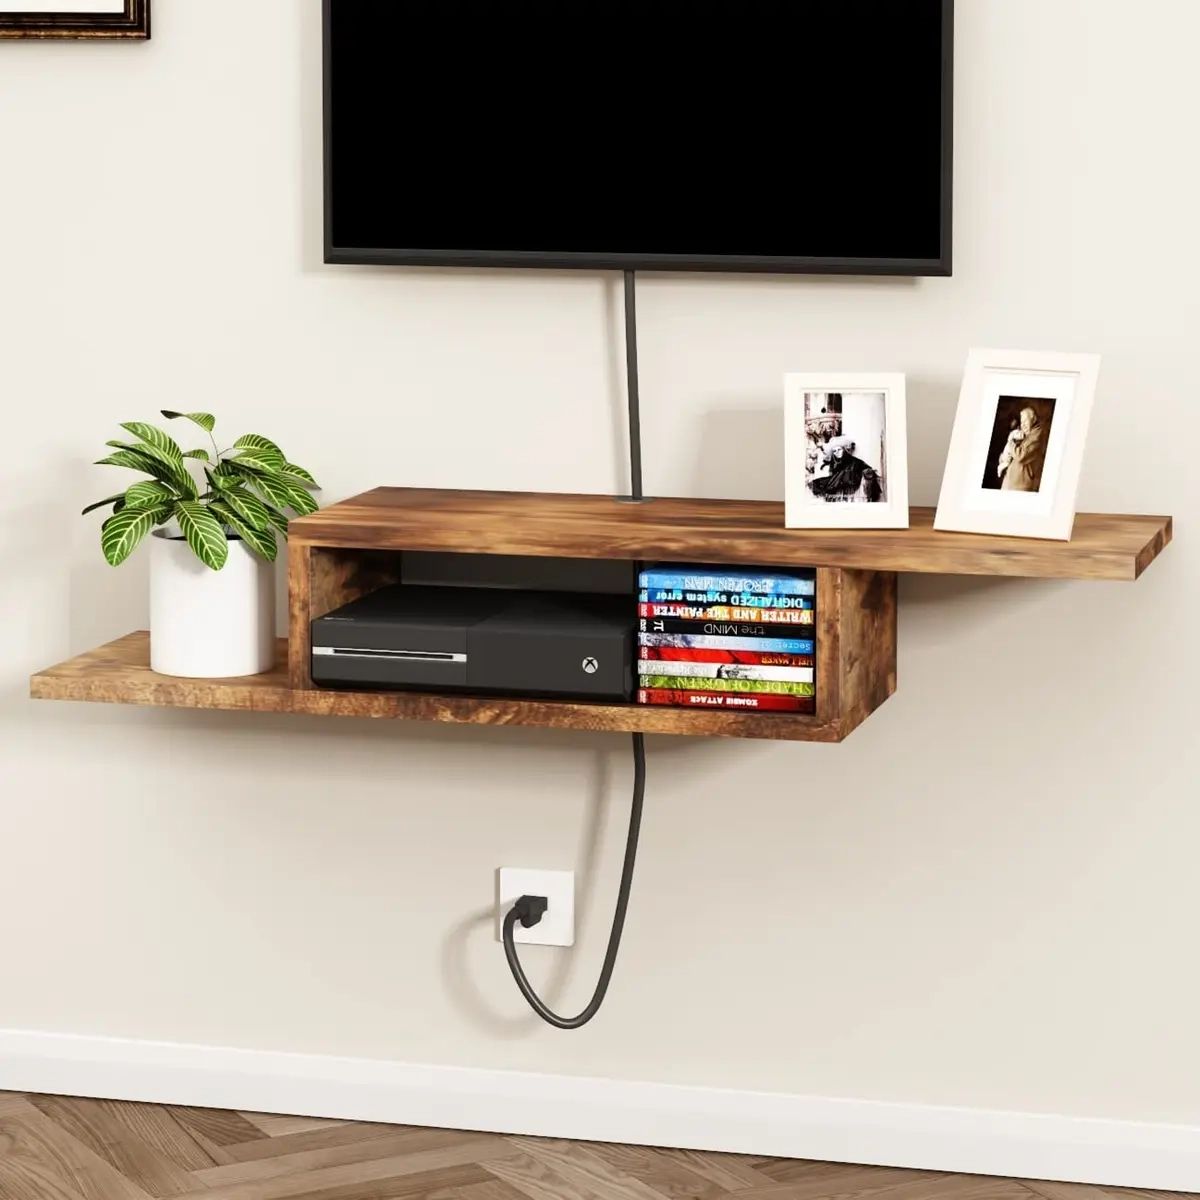 Floating Tv Stand Shelf, Wall Mount Entertainment Center Media Console For  Livin | Ebay Throughout Wall Mounted Floating Tv Stands (View 14 of 15)